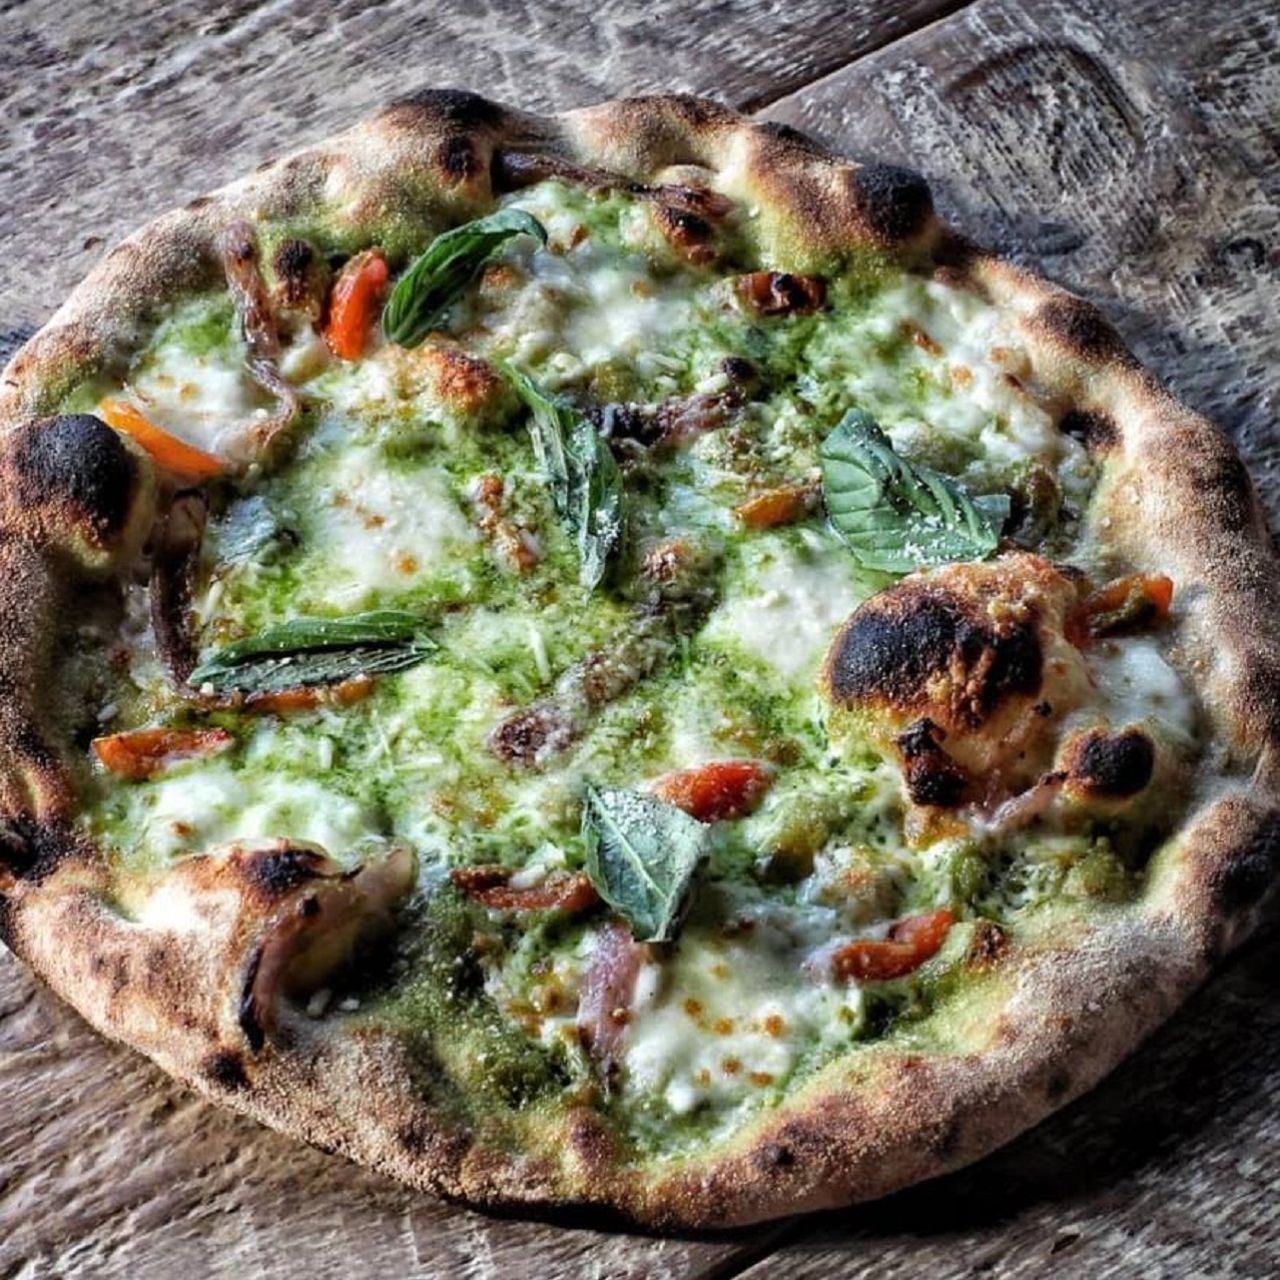 How a Jersey City Pizzaiolo Churns out Hundreds of Wood-Fired Pies